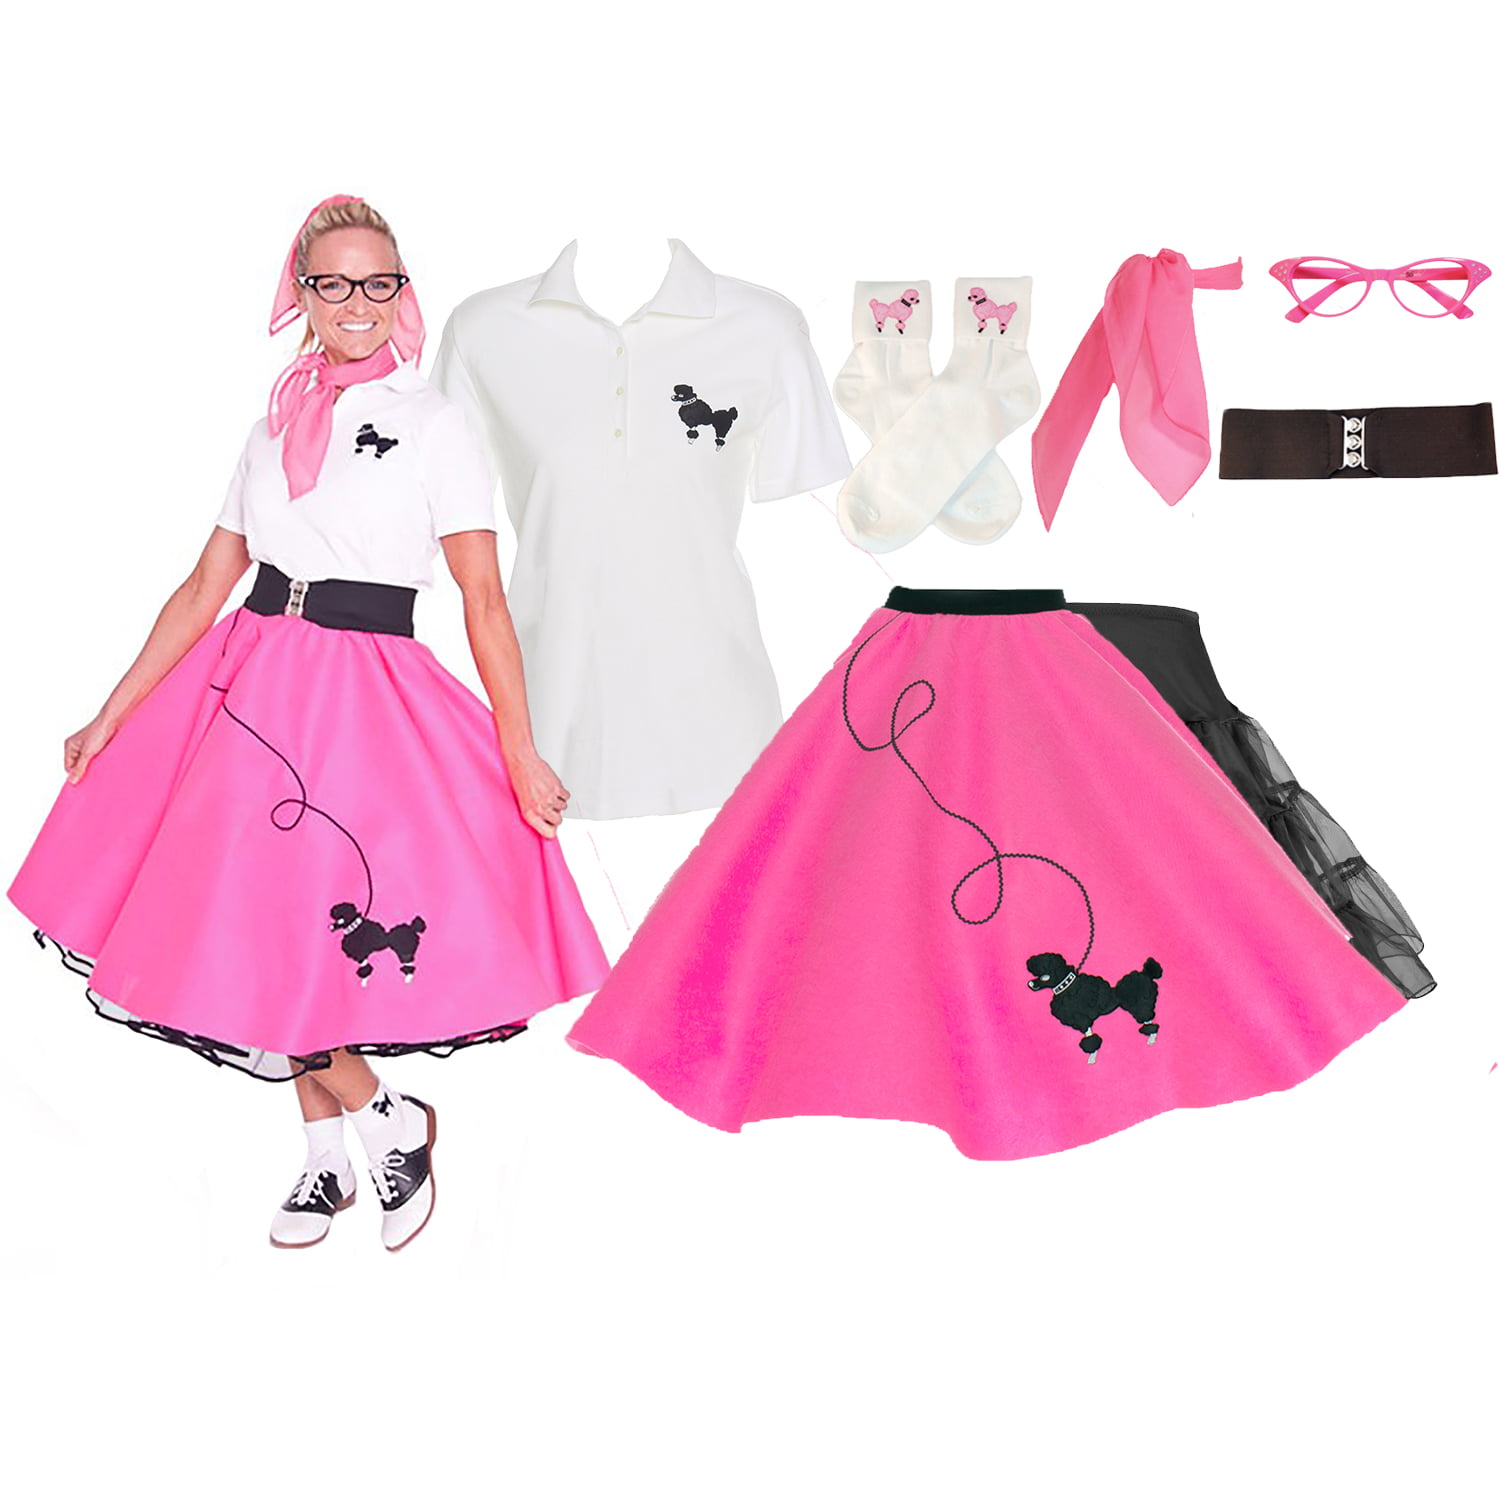 Girls 50s Grease Lightning Poodle Skirt and Blouse Fancy Dress Costume Age 4-6 